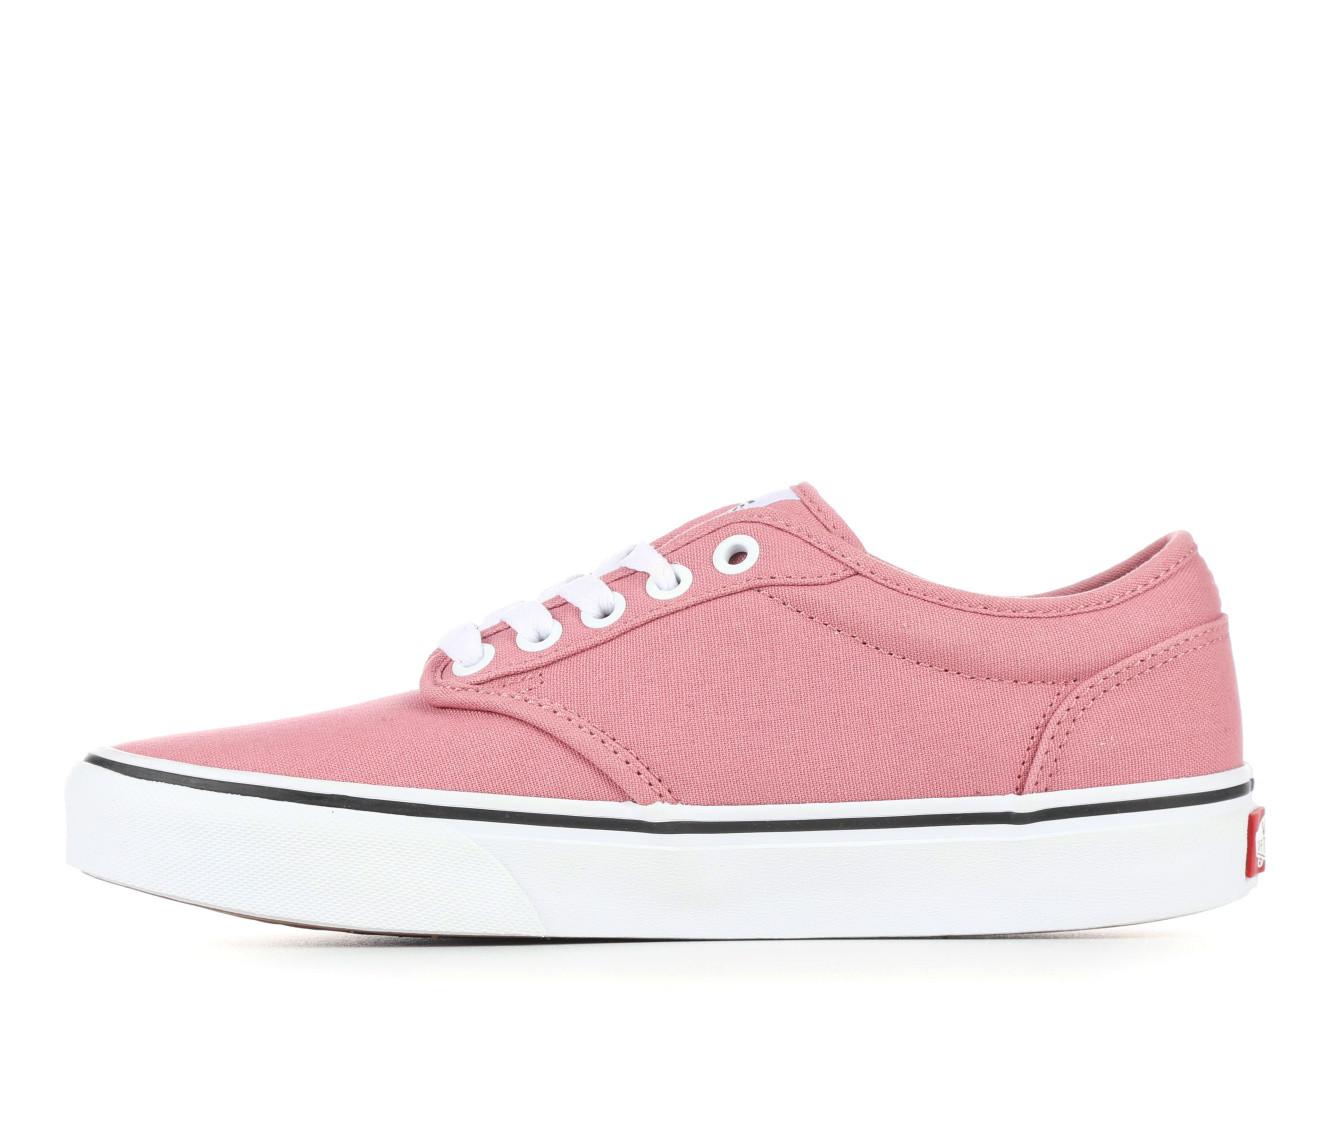 Women's Vans Atwood Skate Shoes